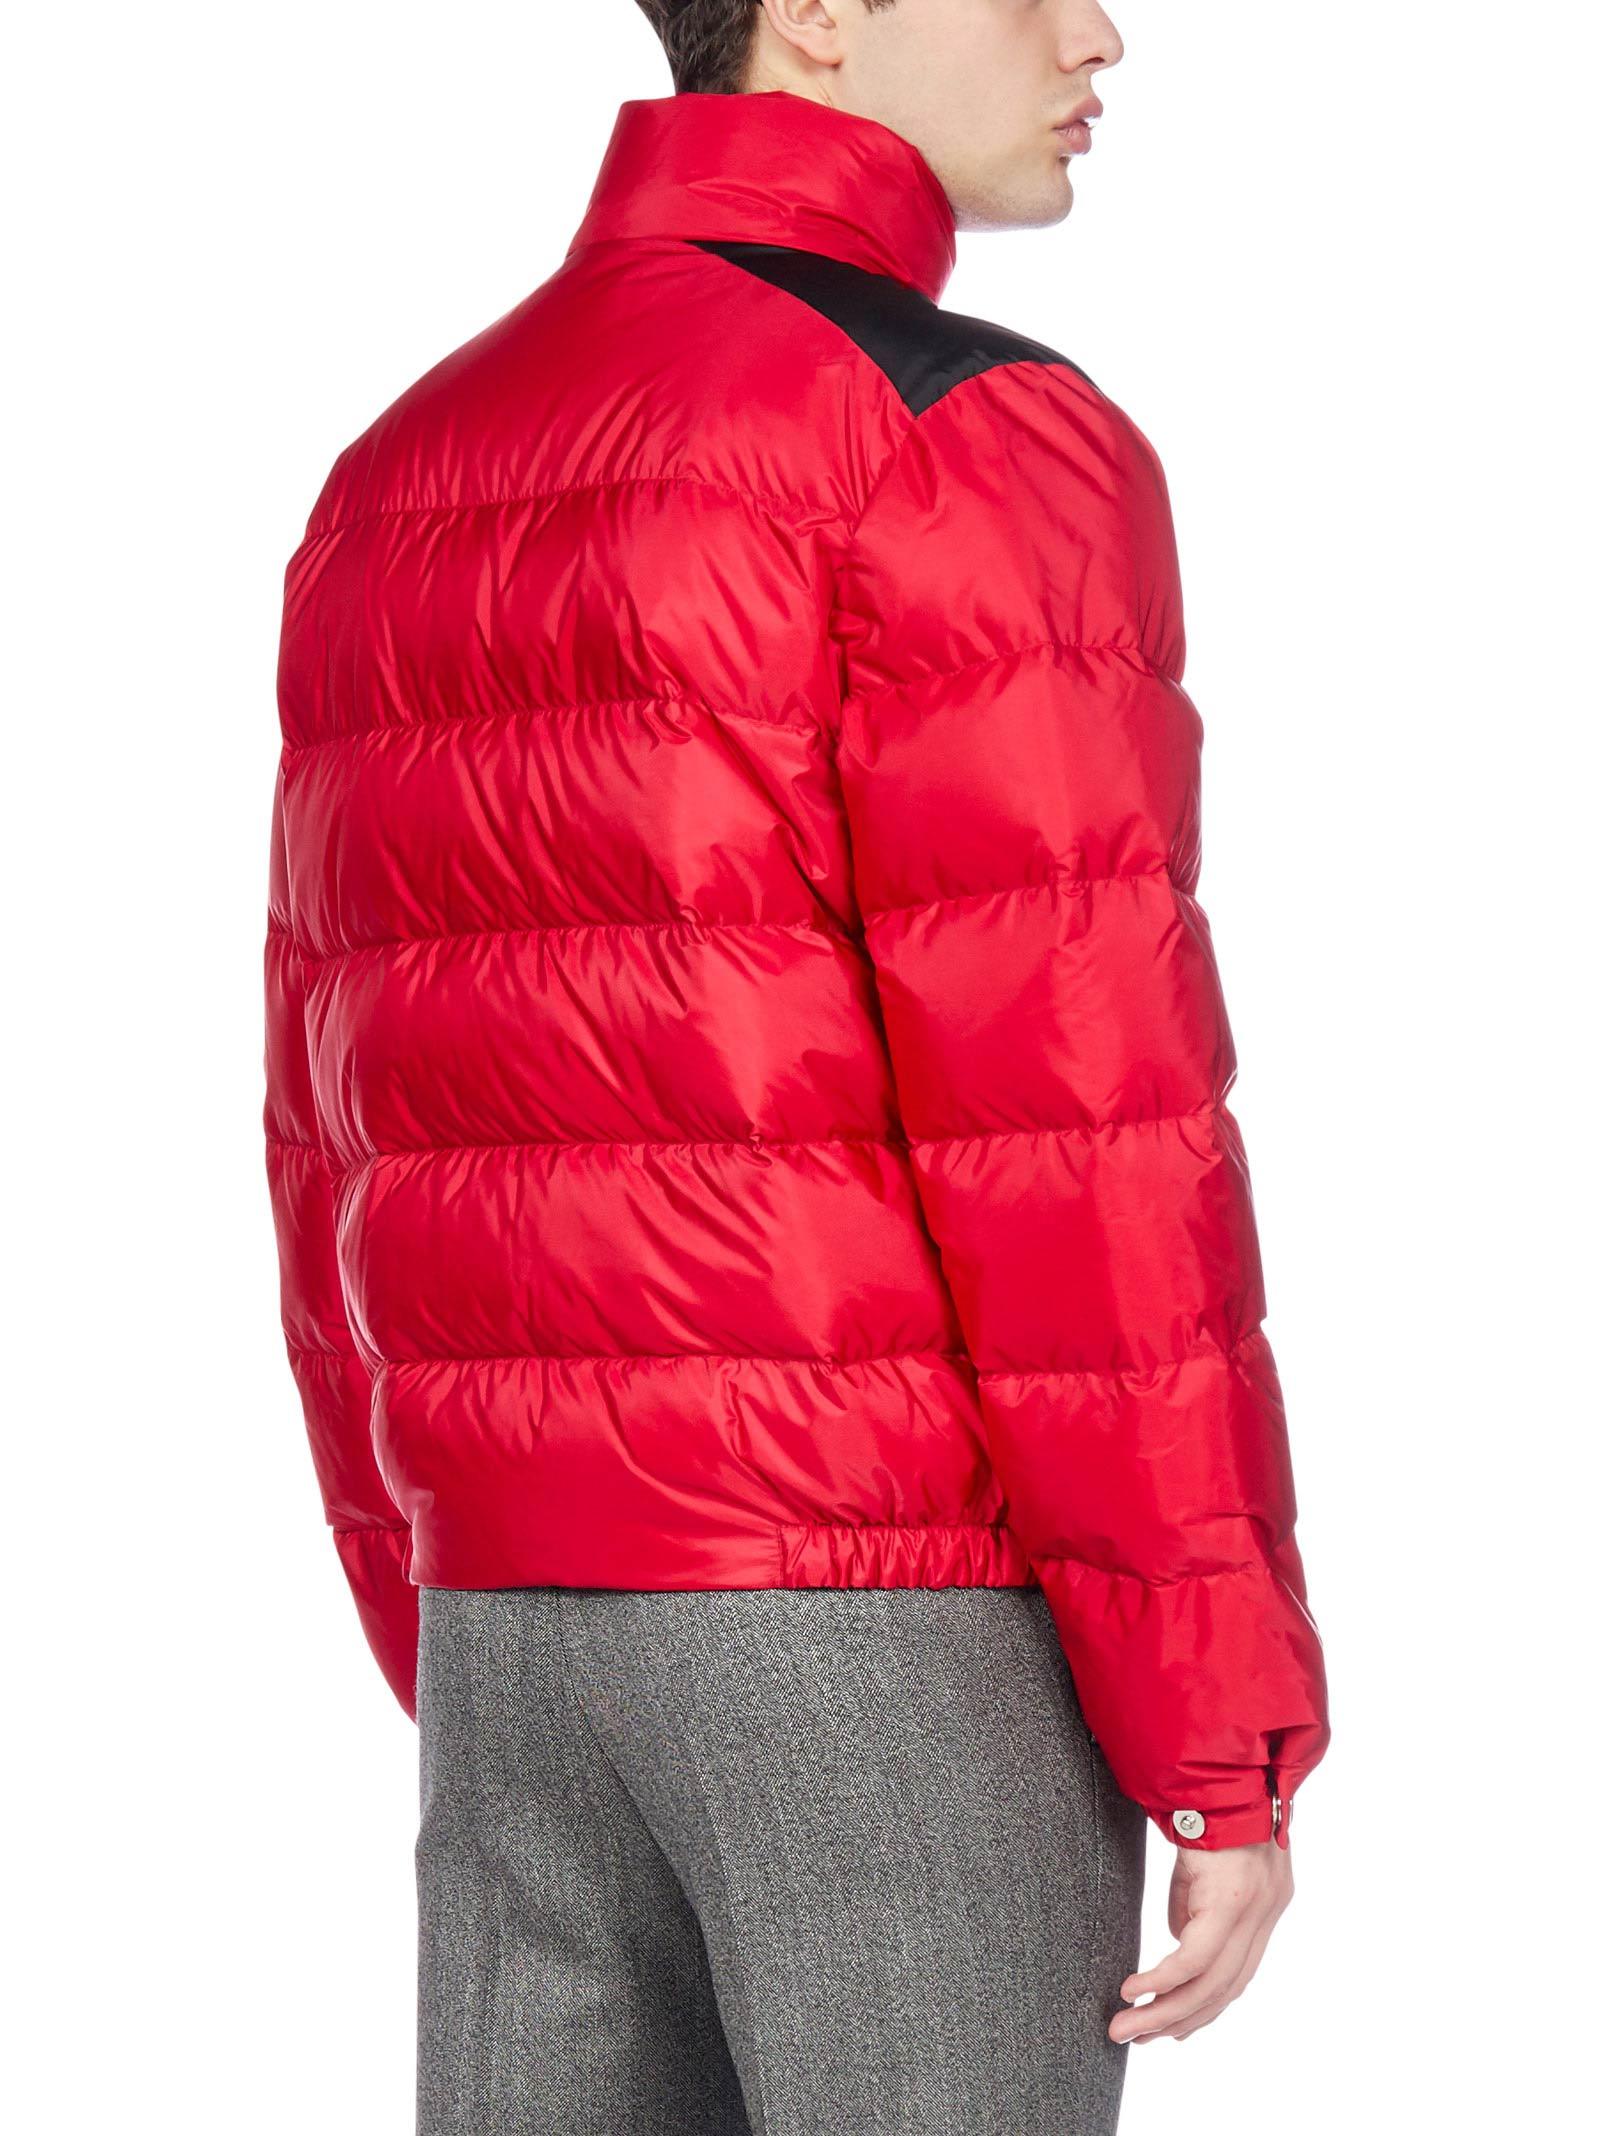 Prada Synthetic Triangle Logo Puffer Jacket in Red for Men - Lyst